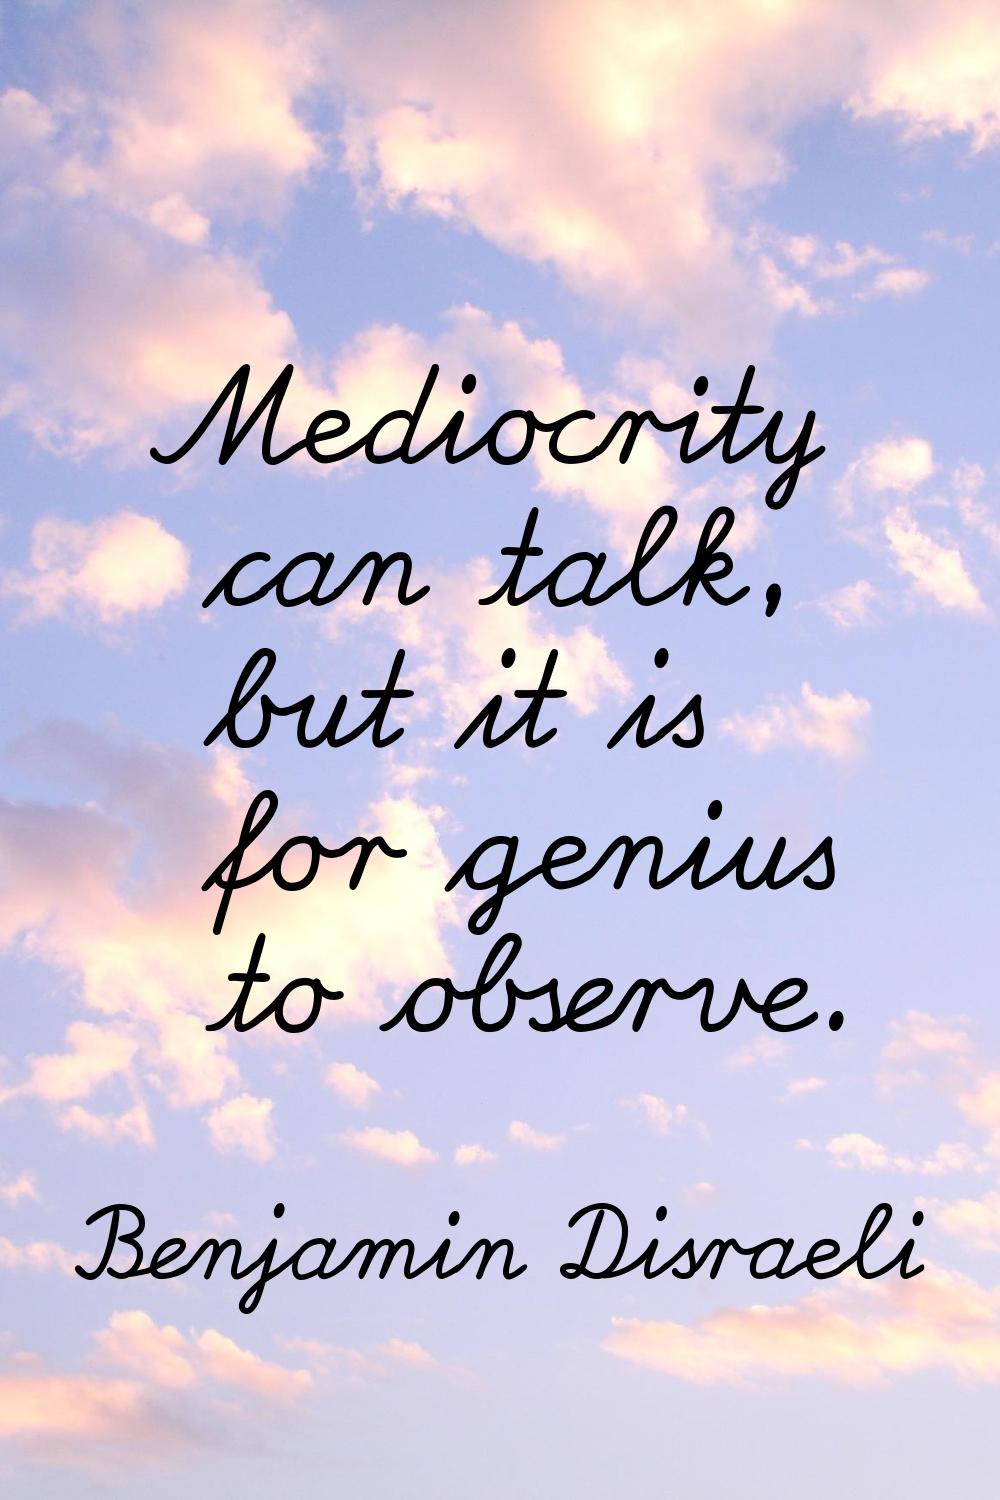 Mediocrity can talk, but it is for genius to observe.